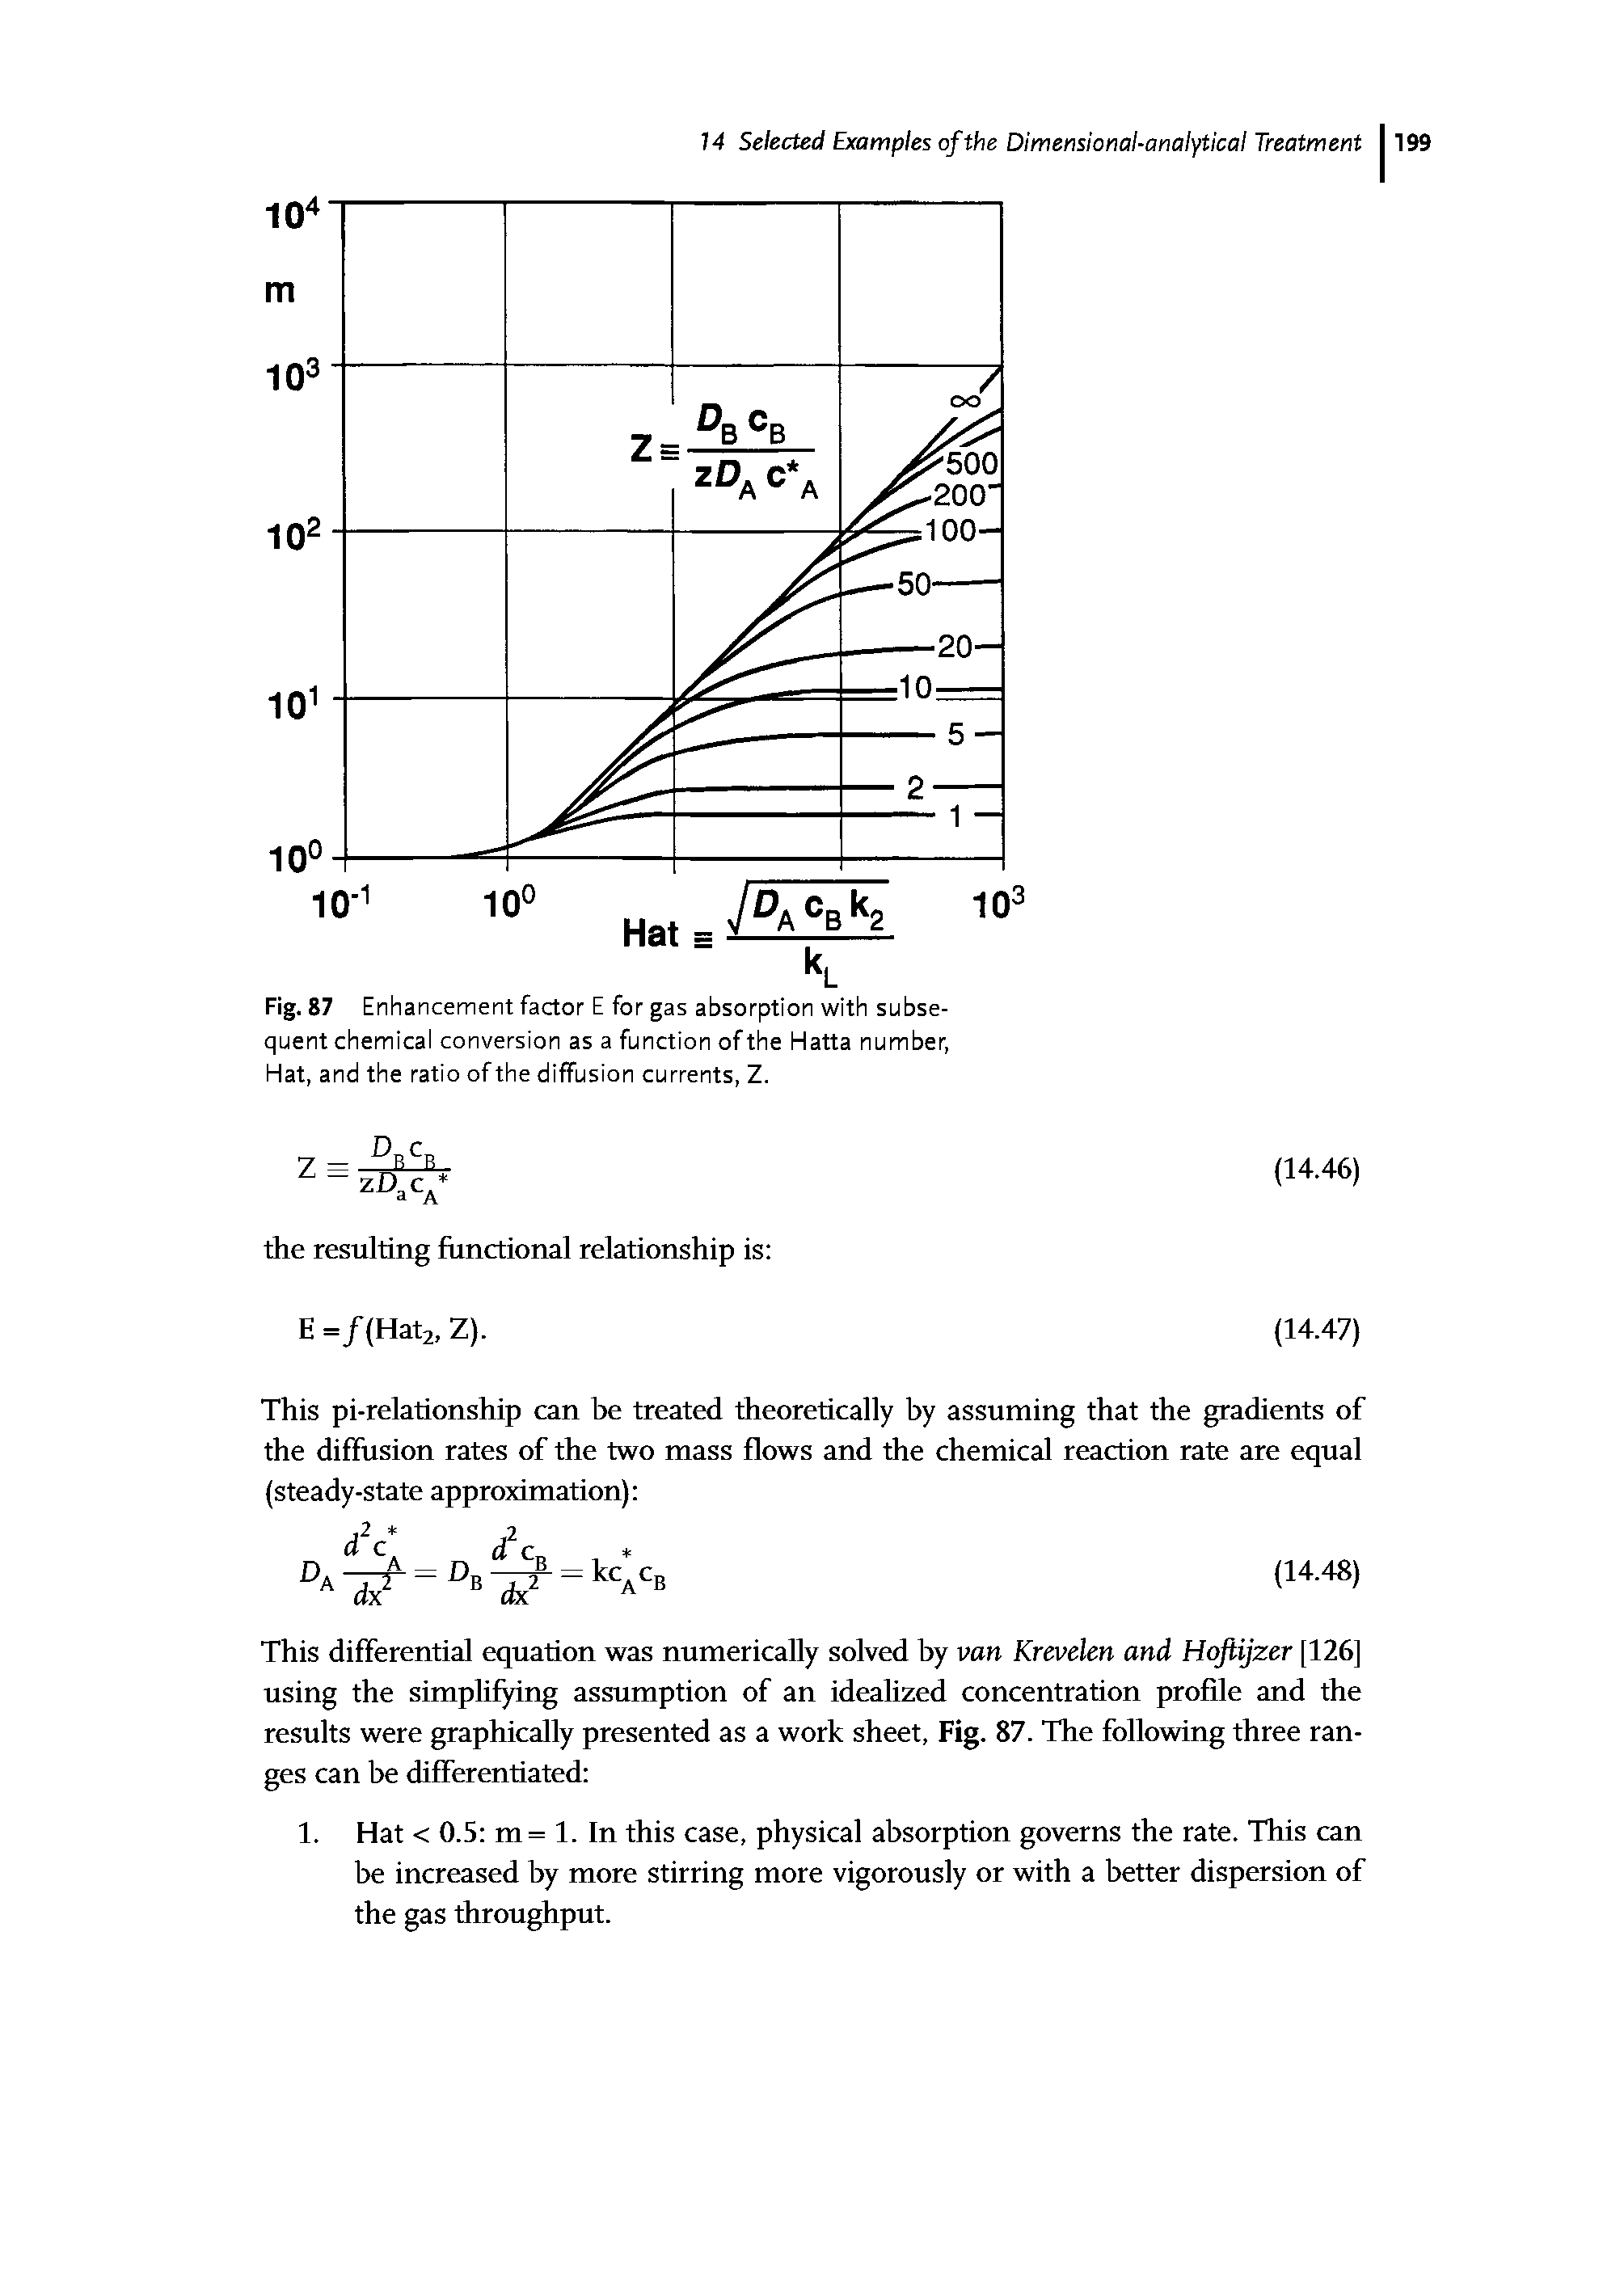 Fig. 87 Enhancement factor E for gas absorption with subsequent chemical conversion as a function of the Hatta number, Hat, and the ratio of the diffusion currents, Z.